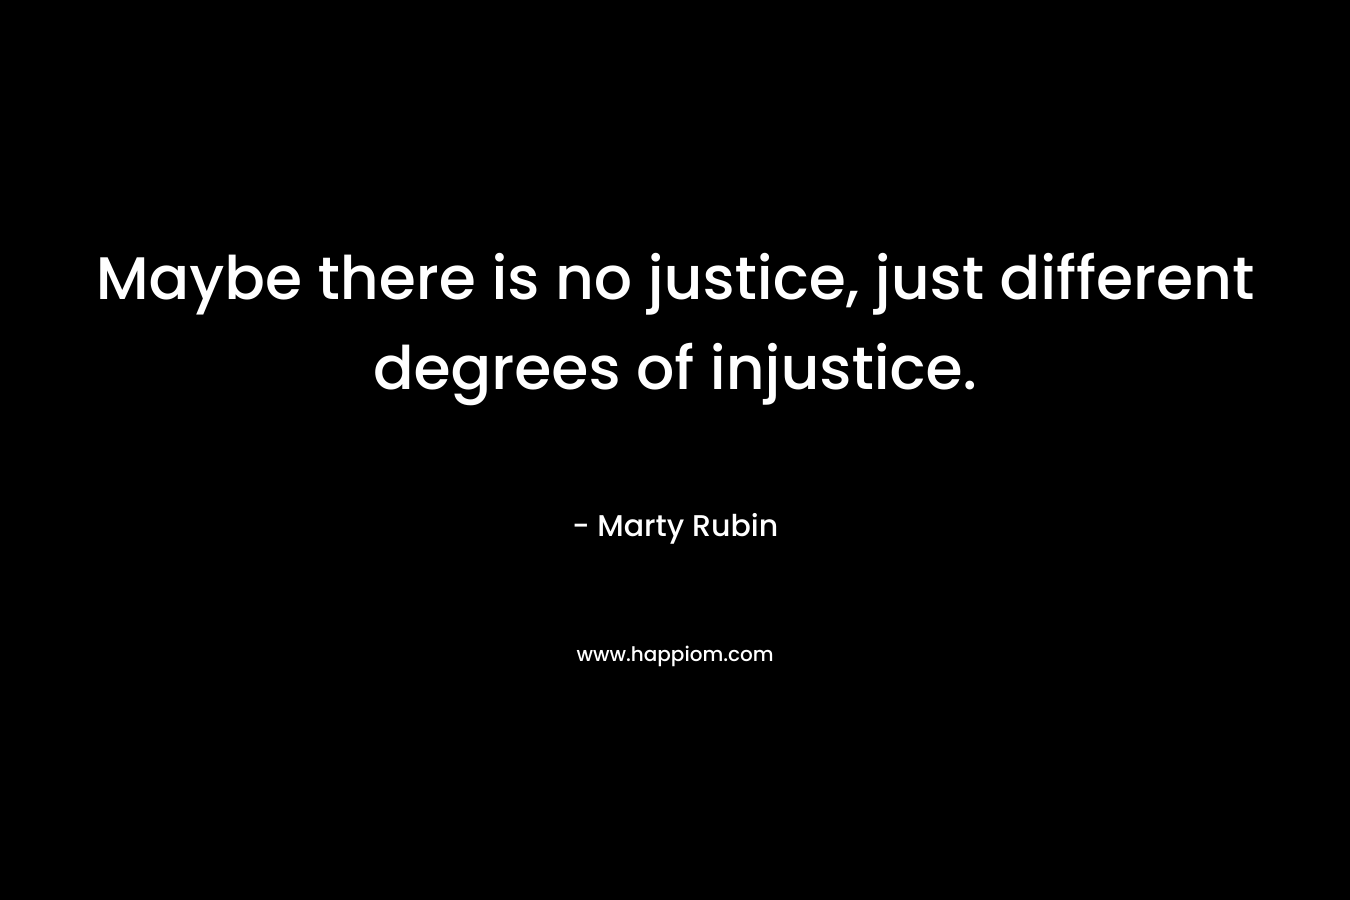 Maybe there is no justice, just different degrees of injustice. – Marty Rubin